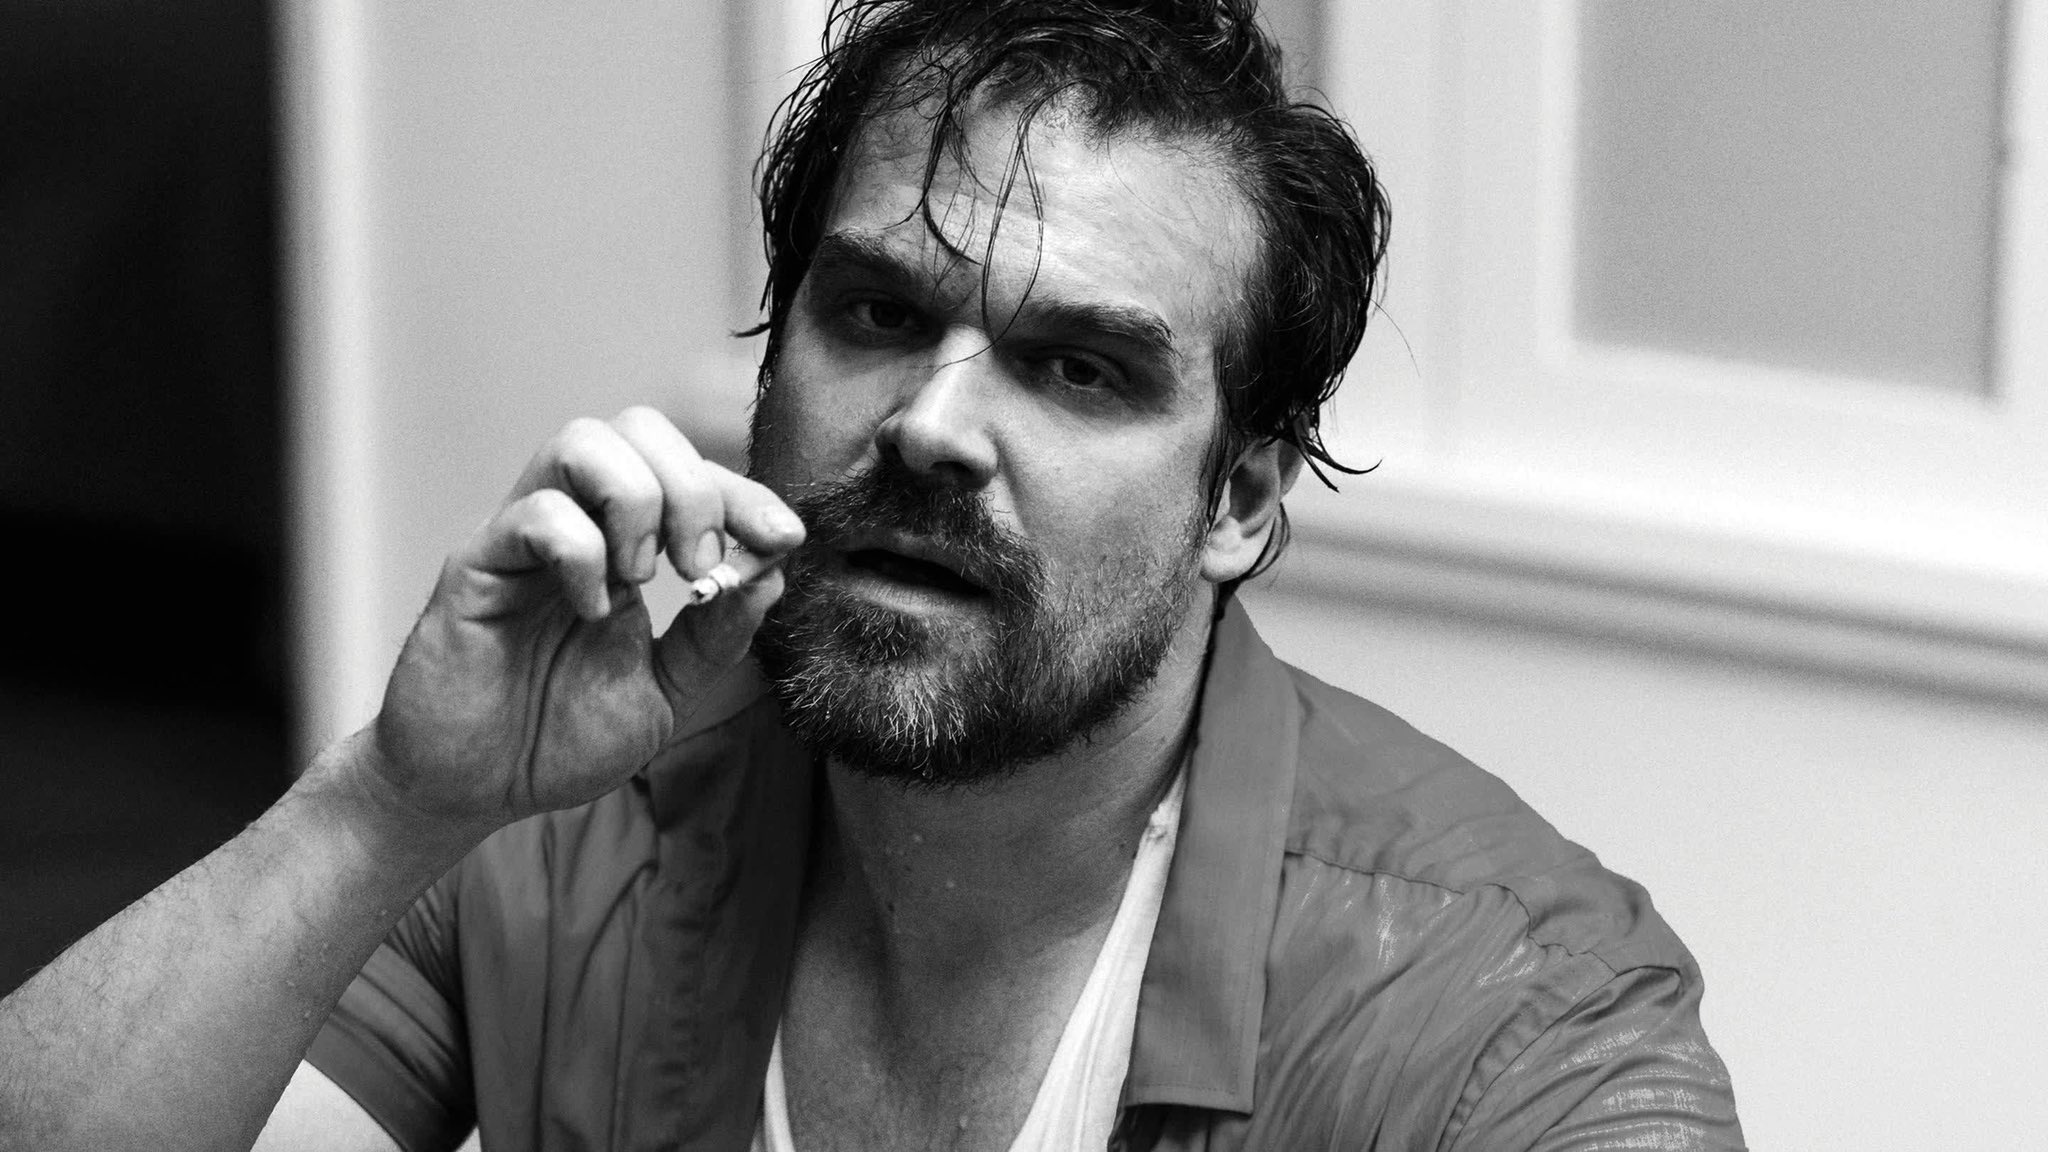 David Harbour to star in The Trashers